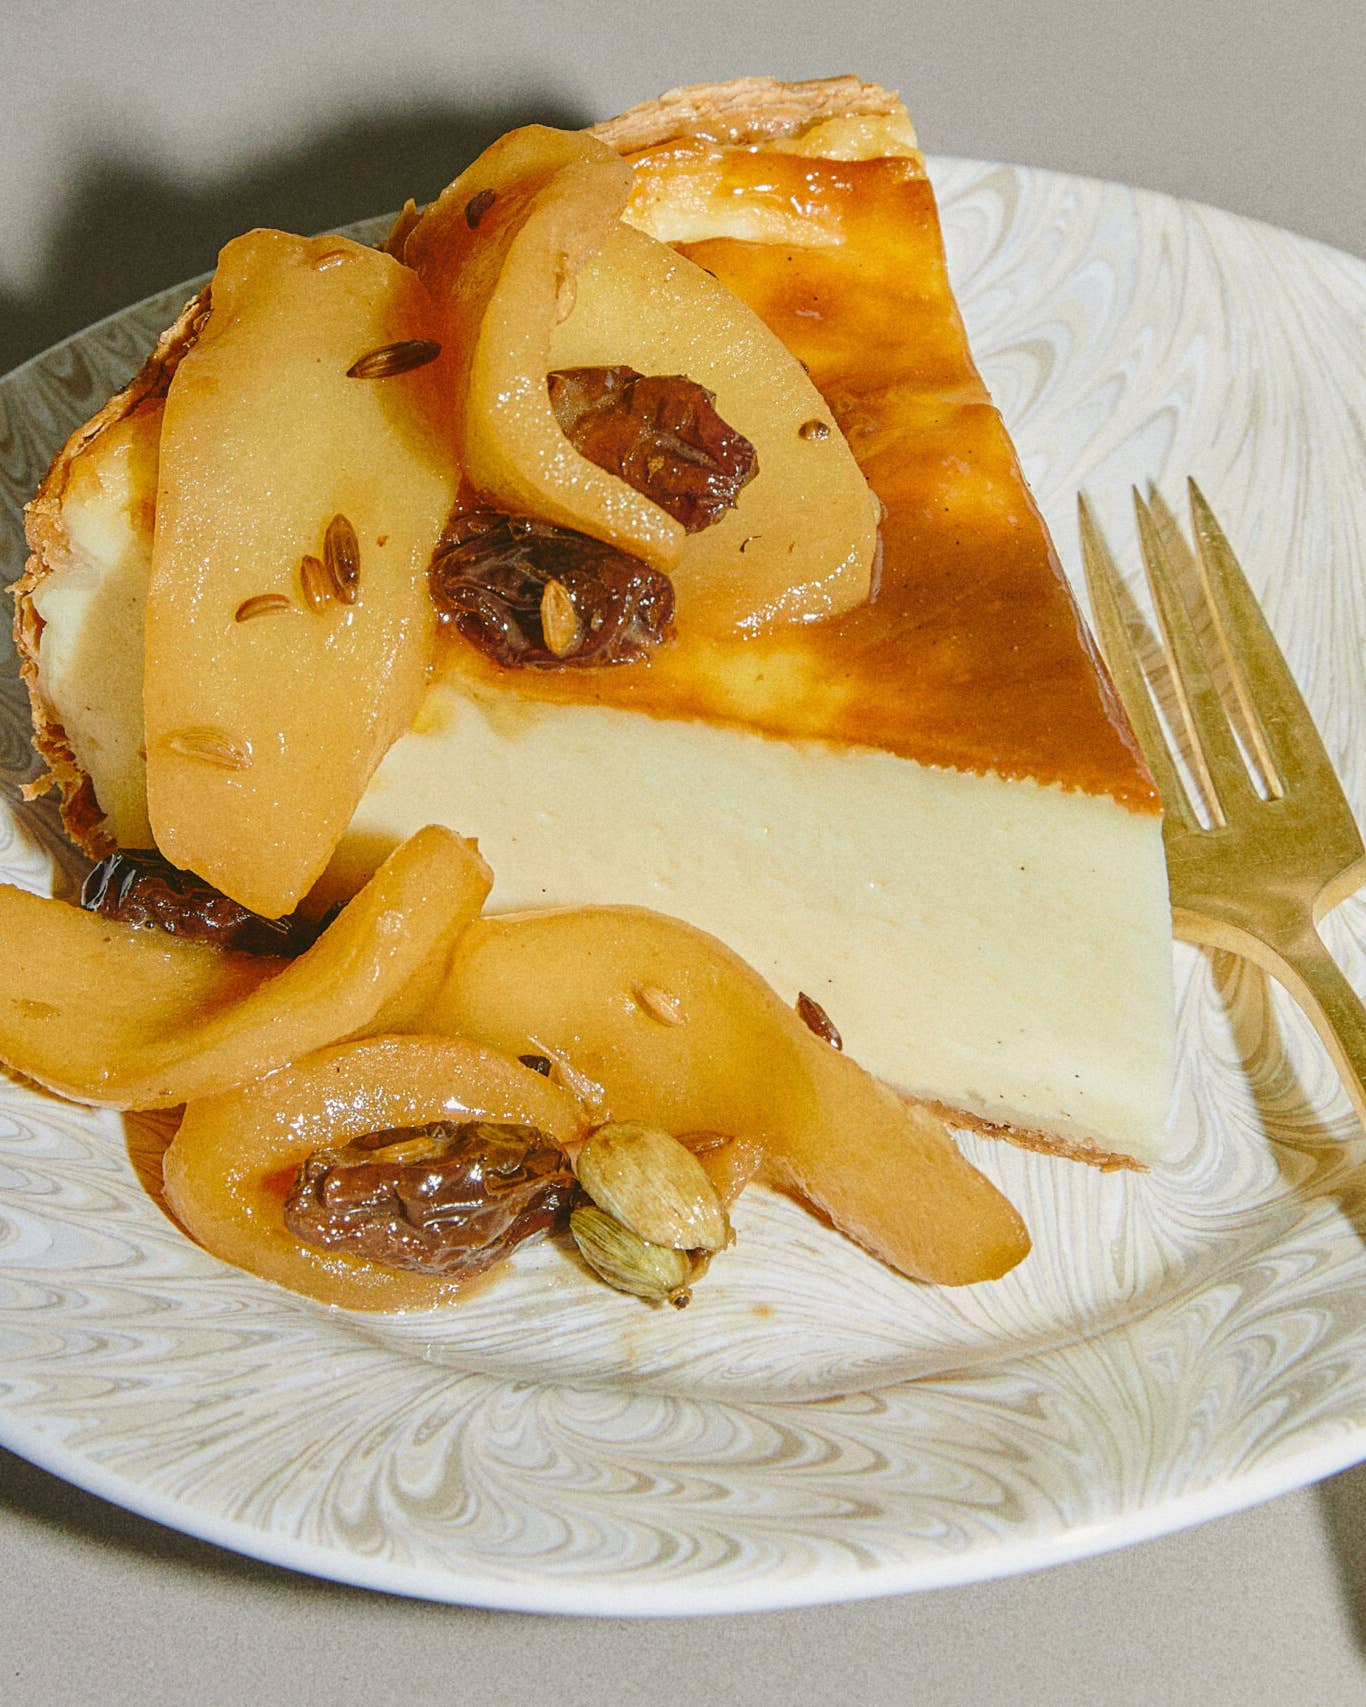 Parisian Flan with Cardamom-Apple Compote